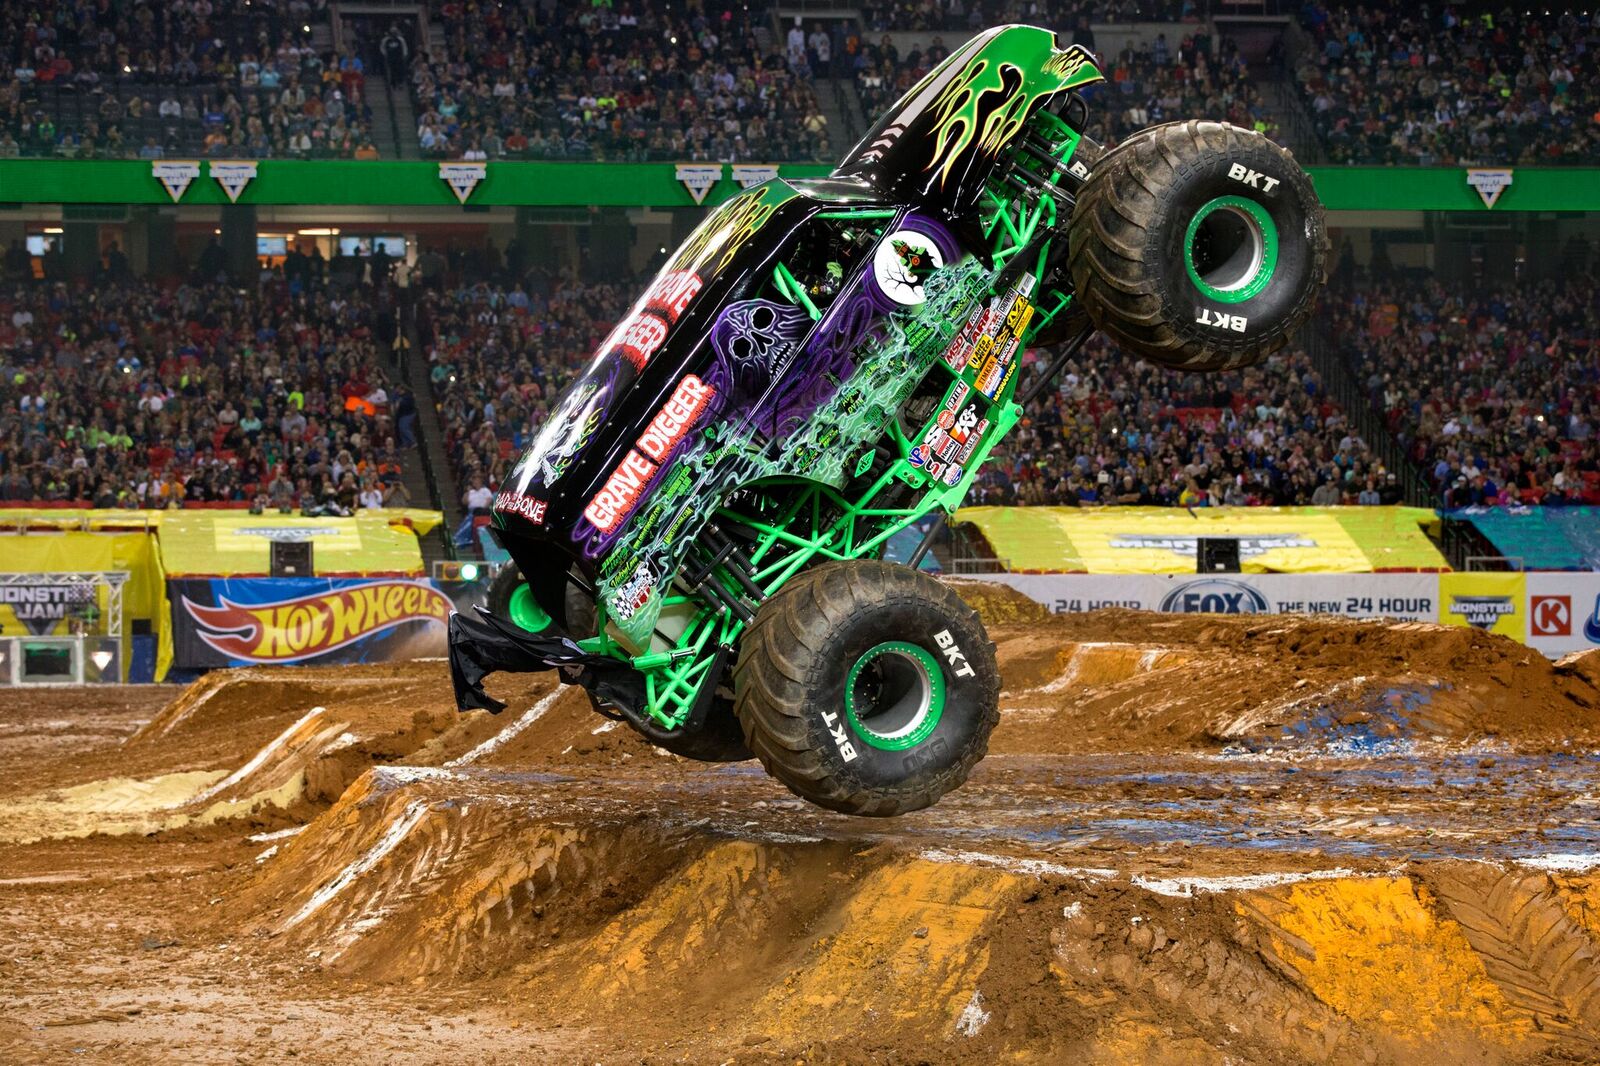 Tickets to Monster Jam Tampa